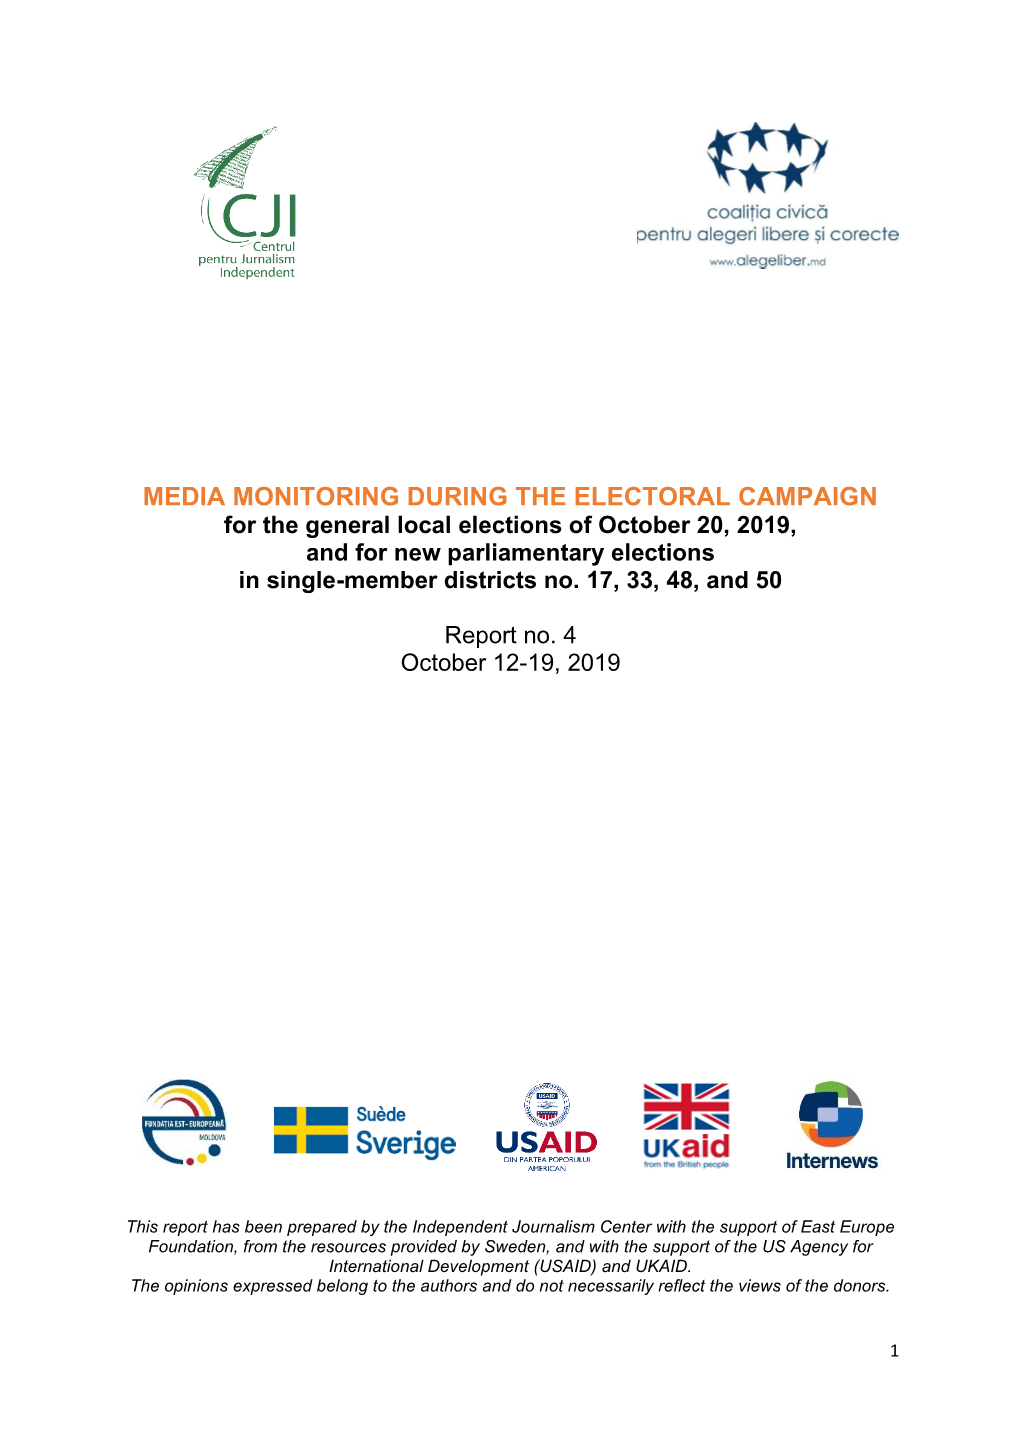 MEDIA MONITORING DURING the ELECTORAL CAMPAIGN for the General Local Elections of October 20, 2019, and for New Parliamentary Elections in Single-Member Districts No